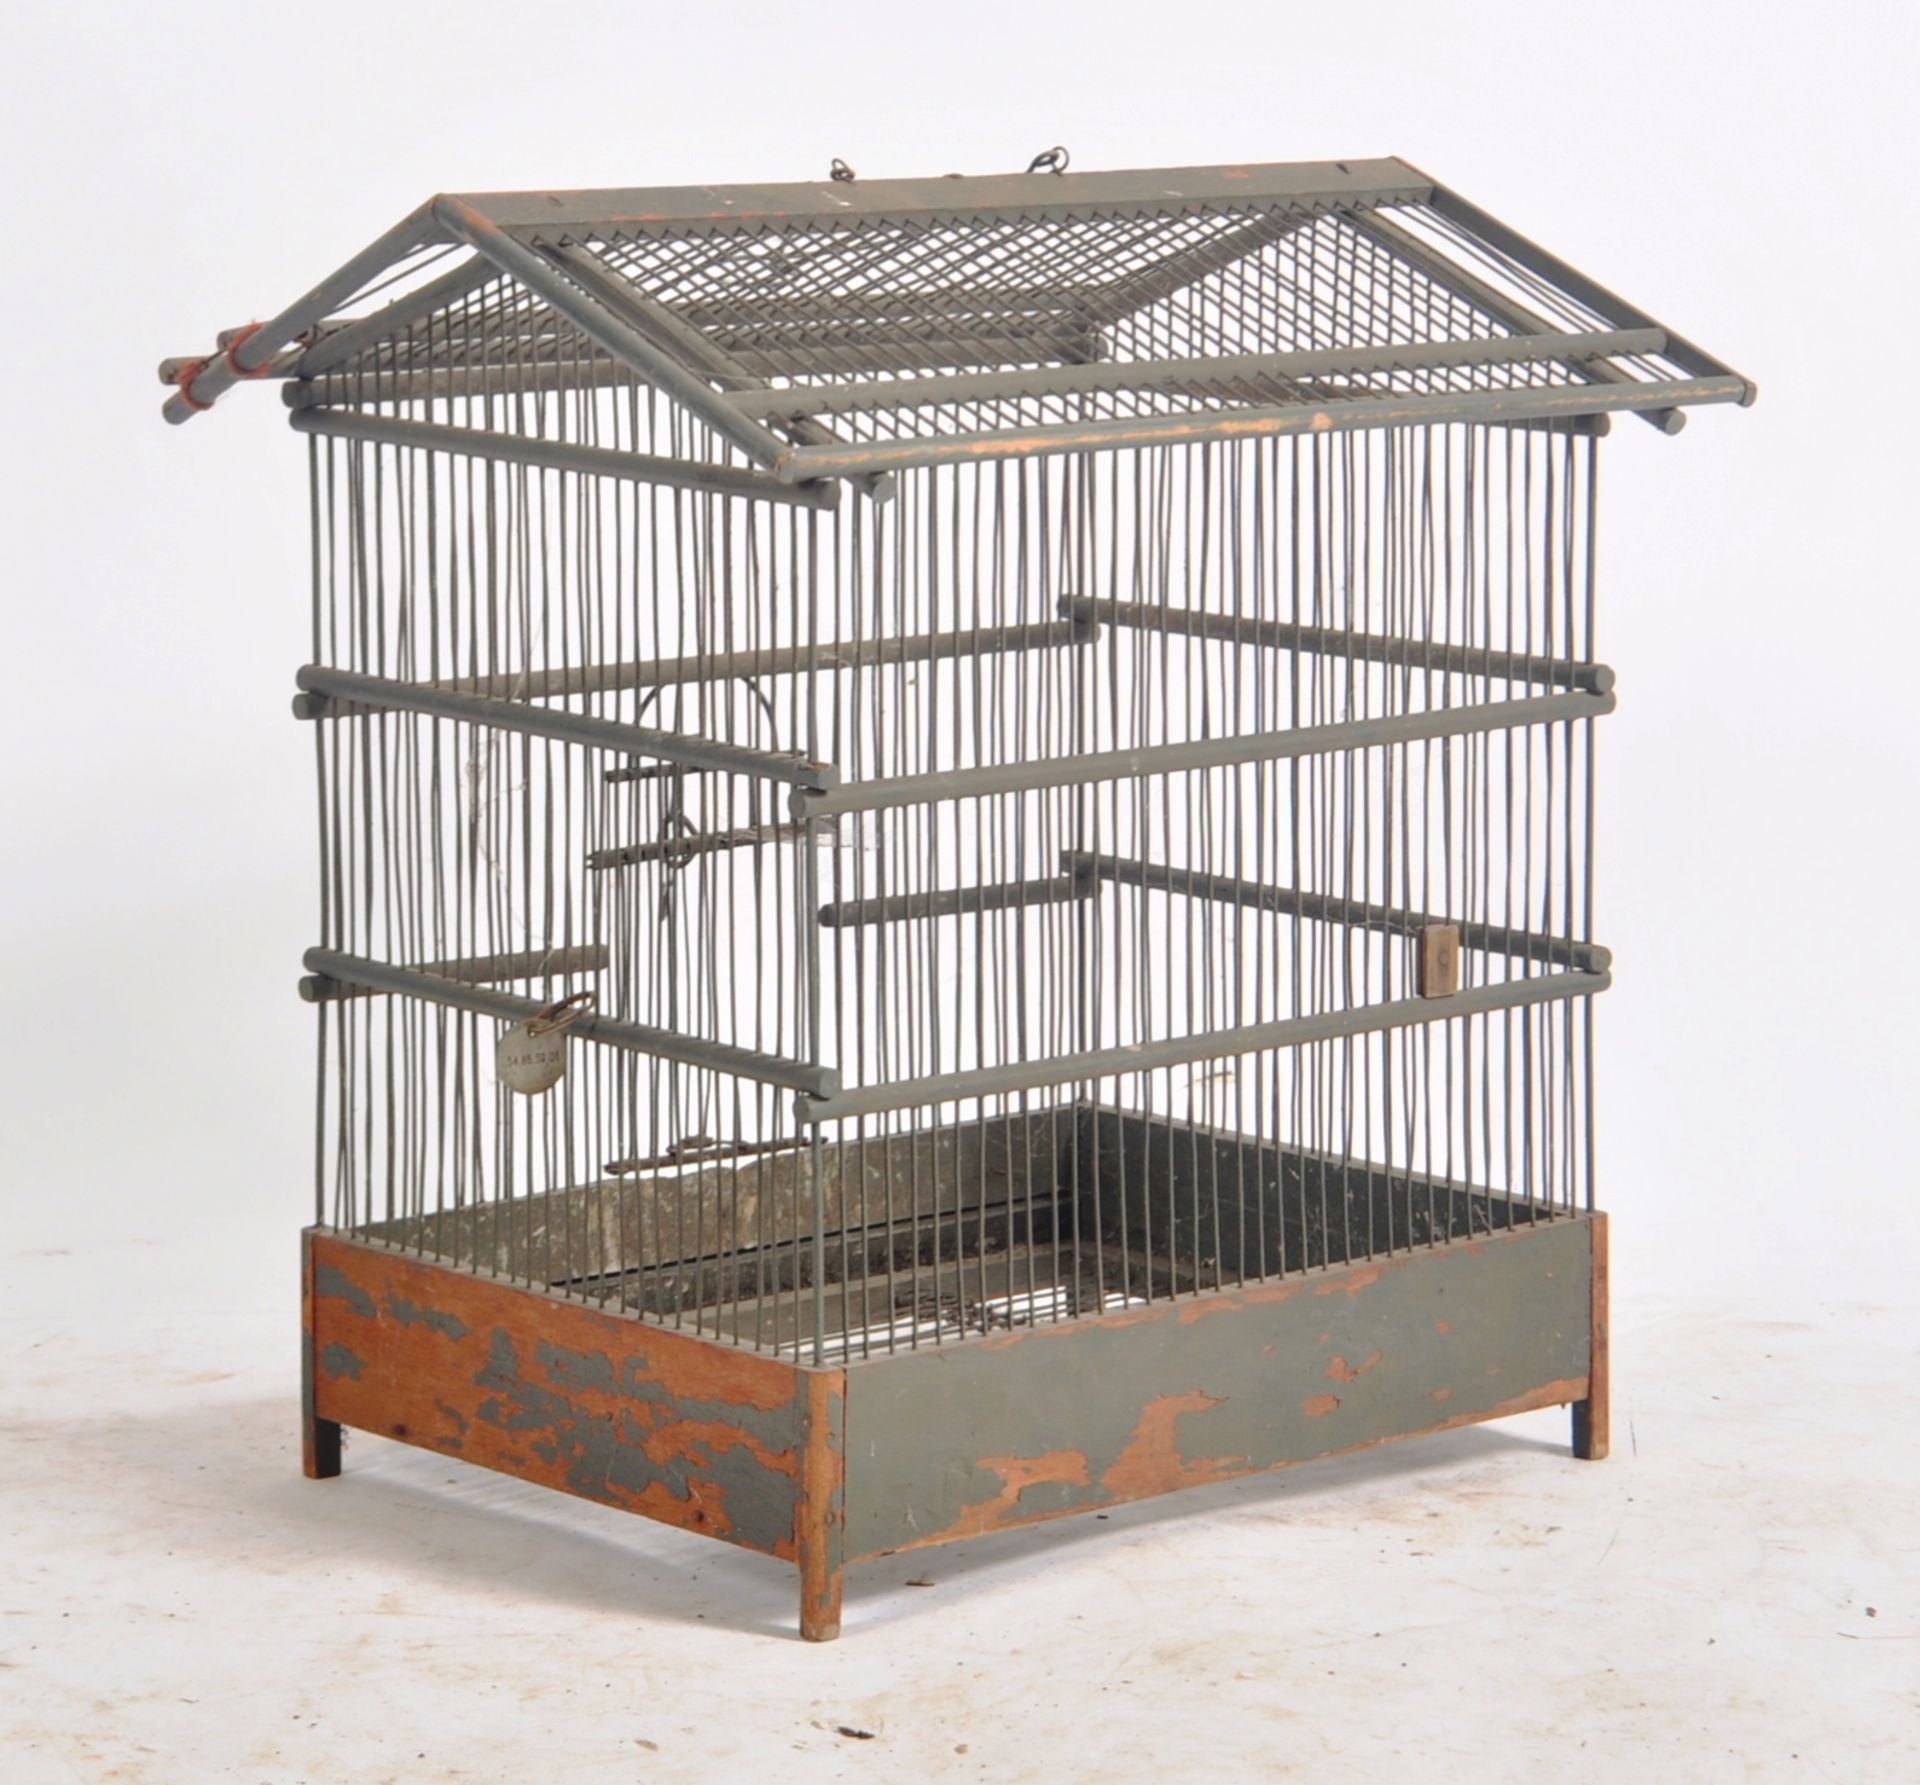 EARLY 20TH CENTURY WOOD & WIRE WORK BIRD CAGE - Image 2 of 5